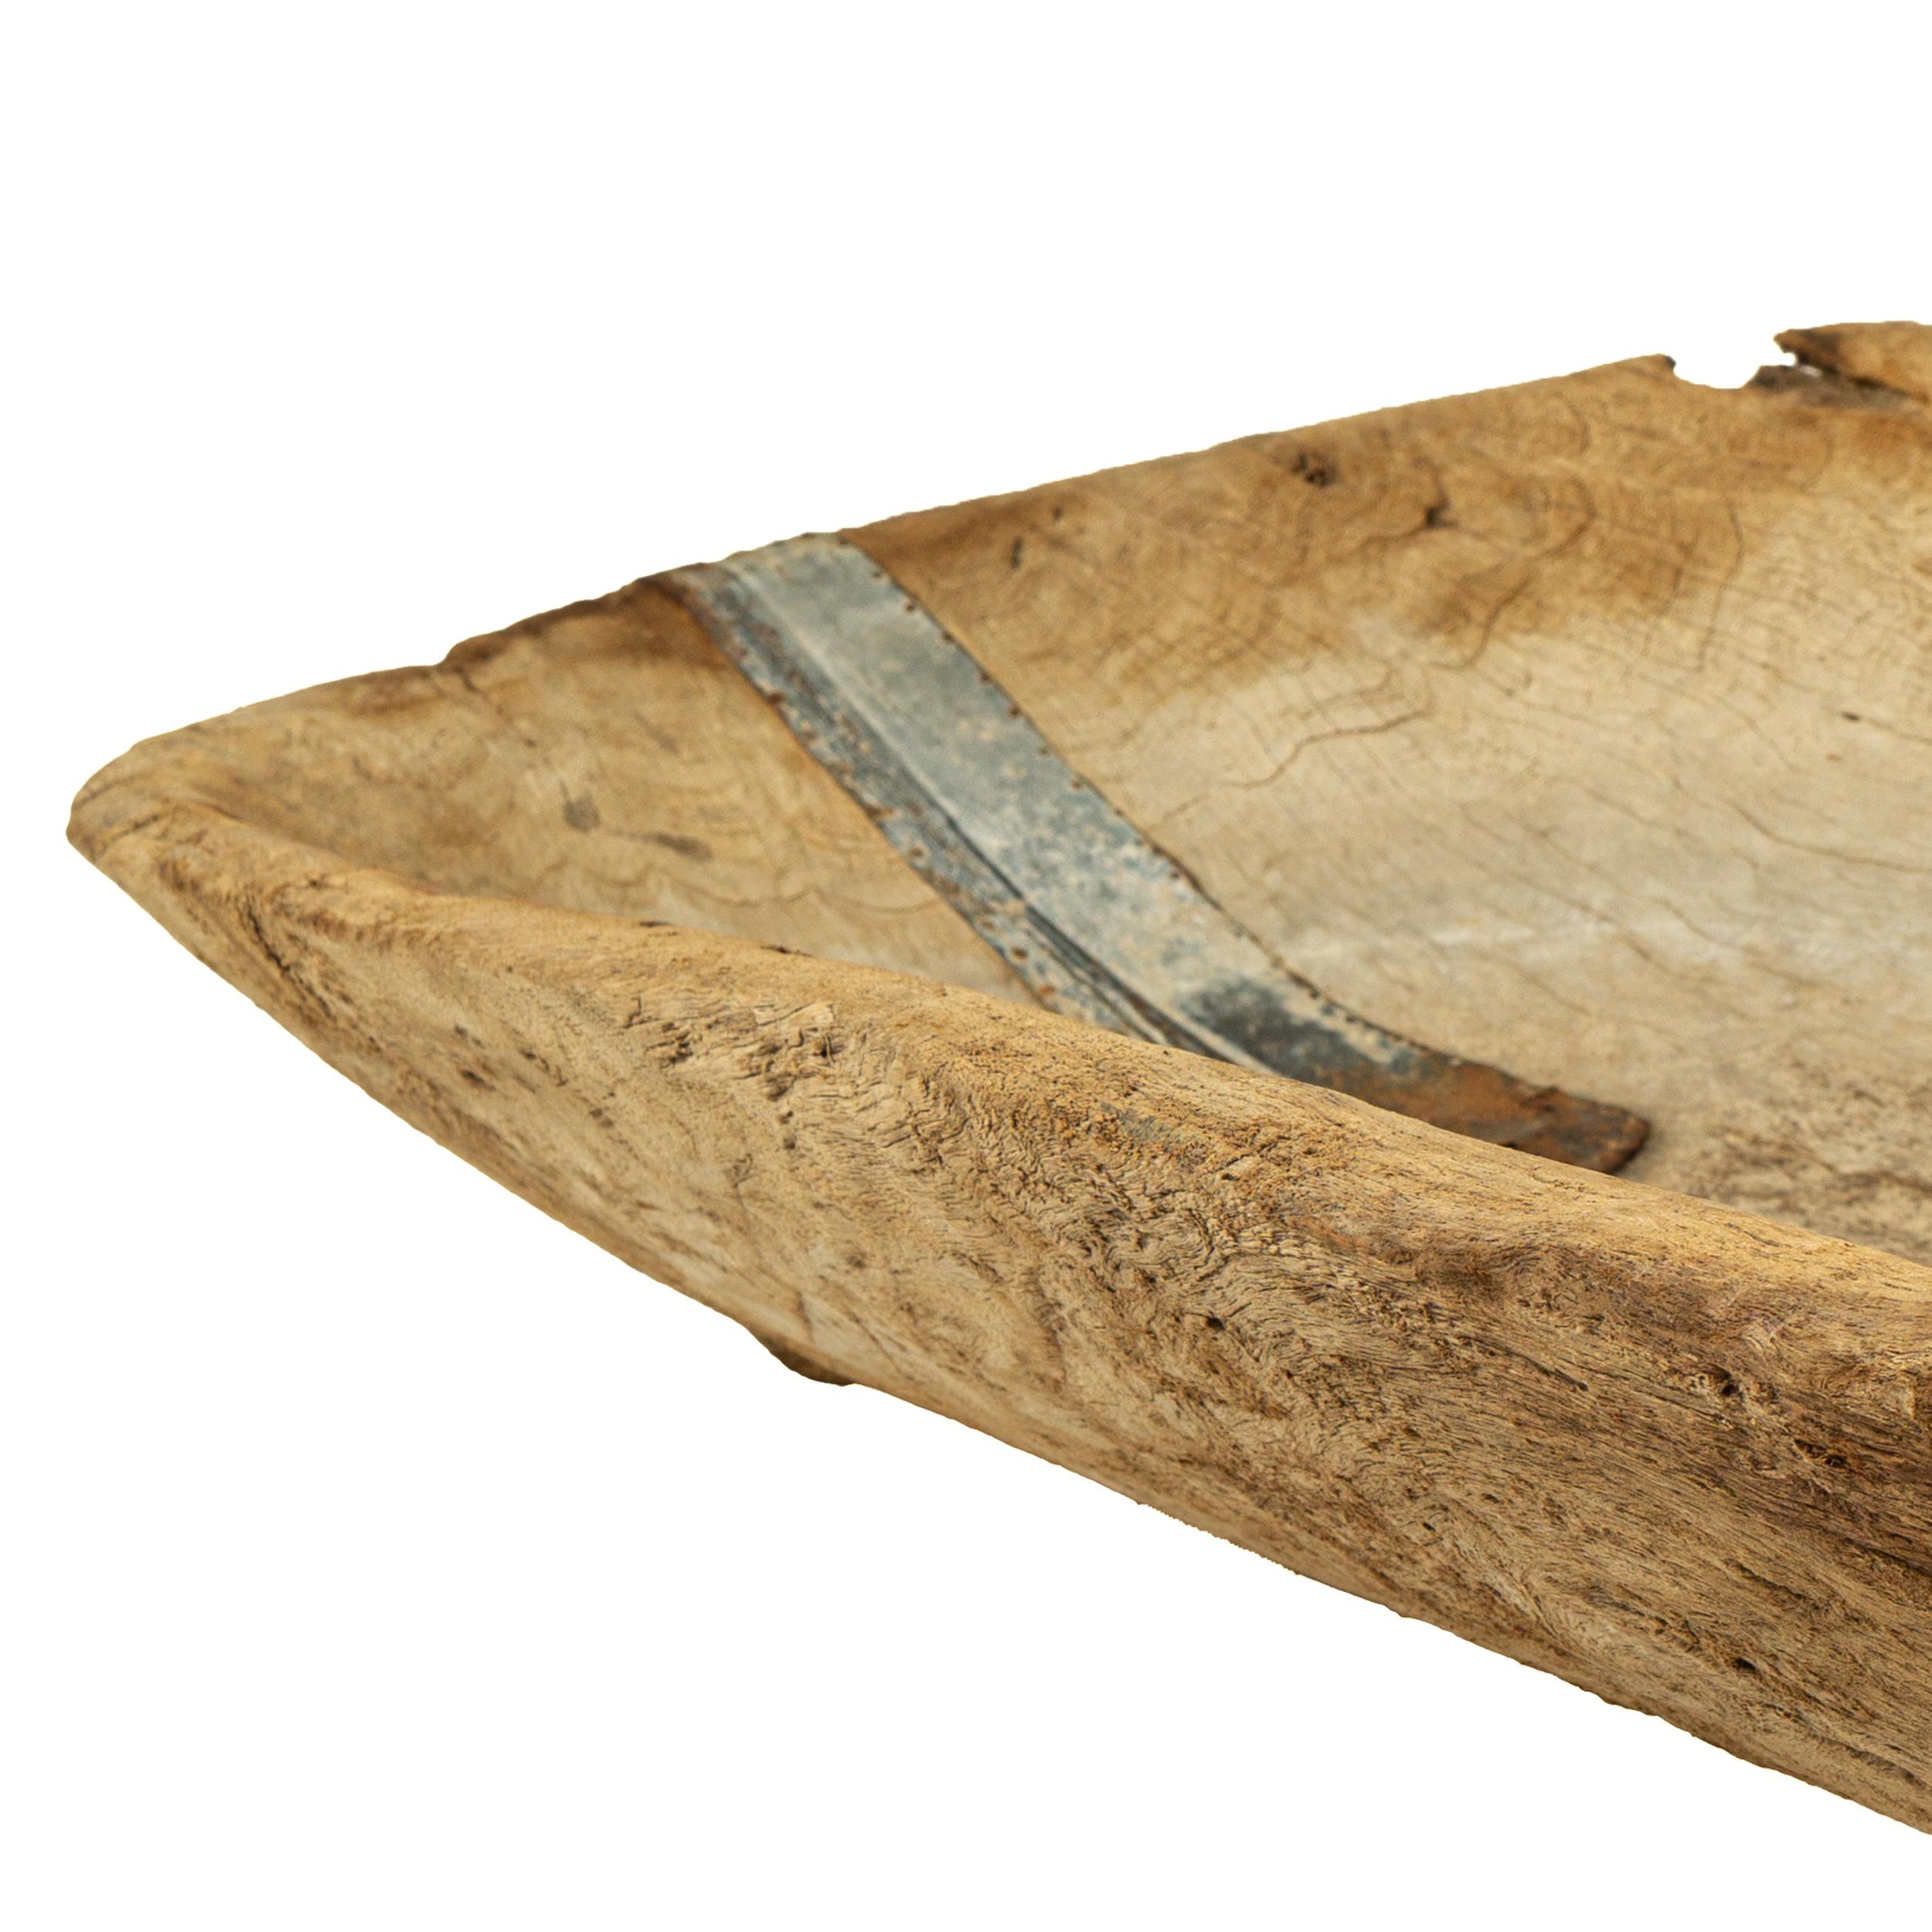 Remarkable Mesquite Wood Trough Bowl Found in Jalisco, Western Mexico, Mid 19th  For Sale 4